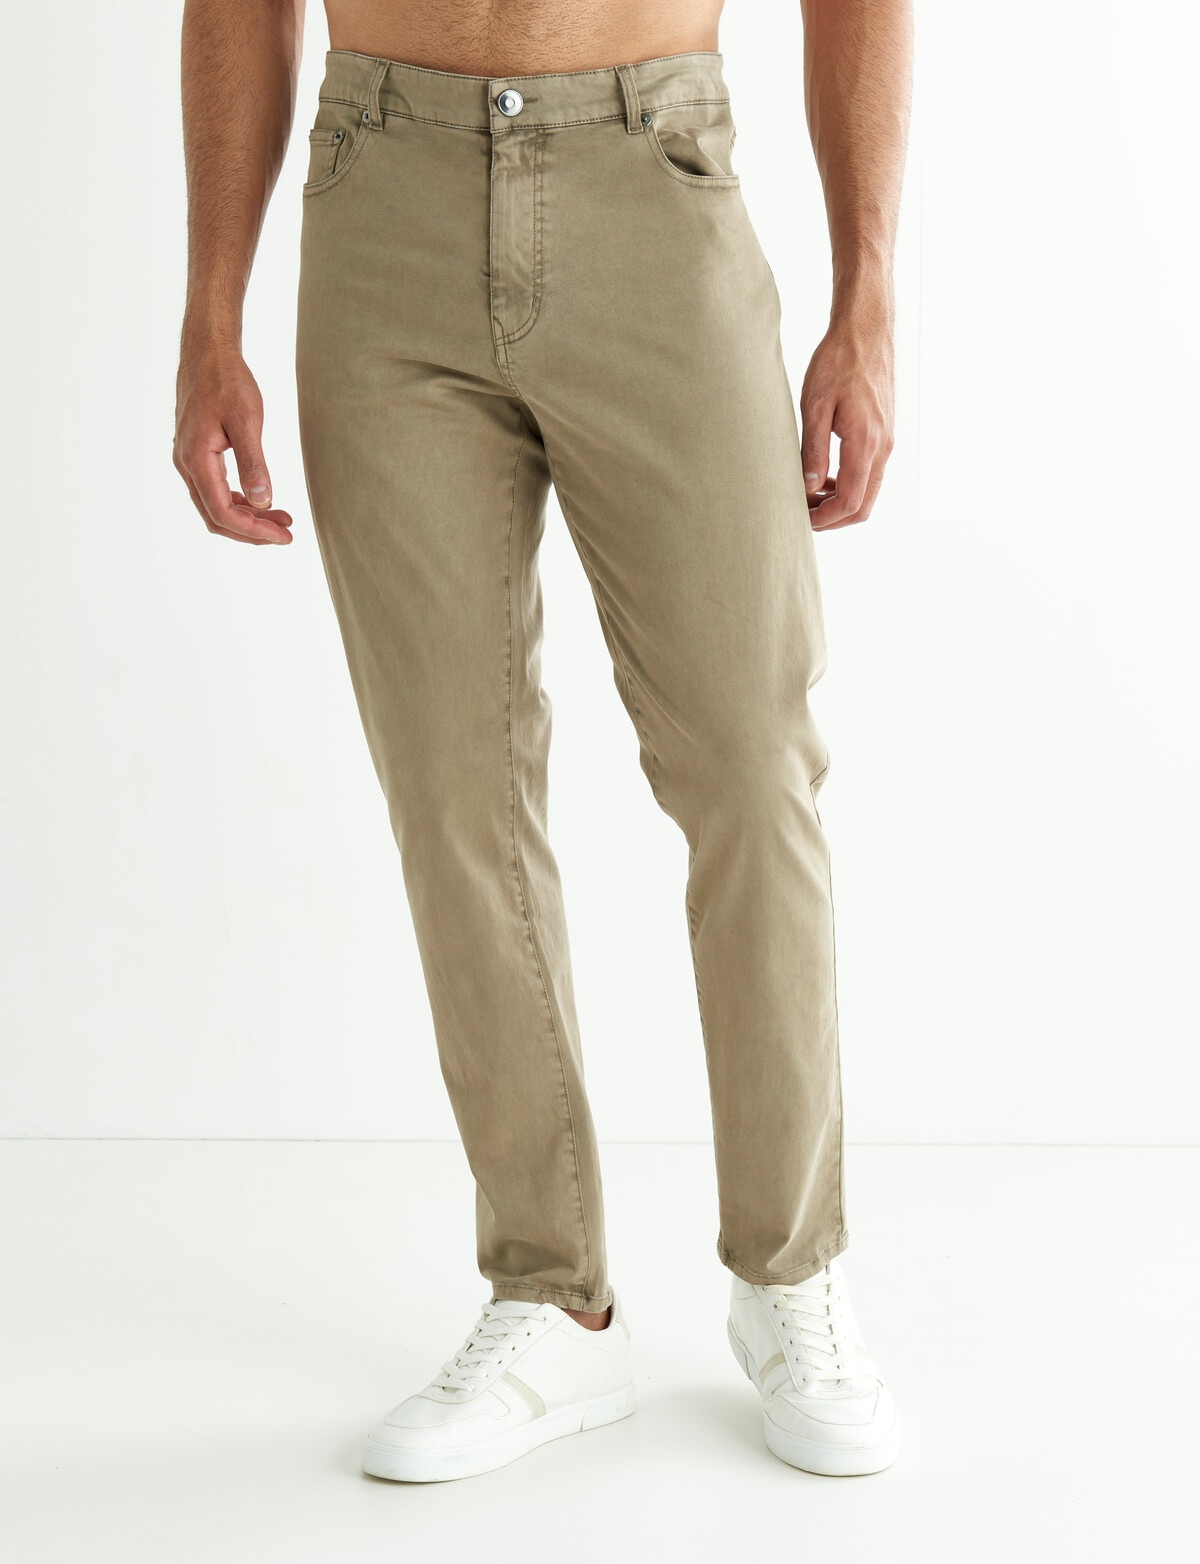 Gasoline Slim Fit Chino Pant, Sand - Casual Pants